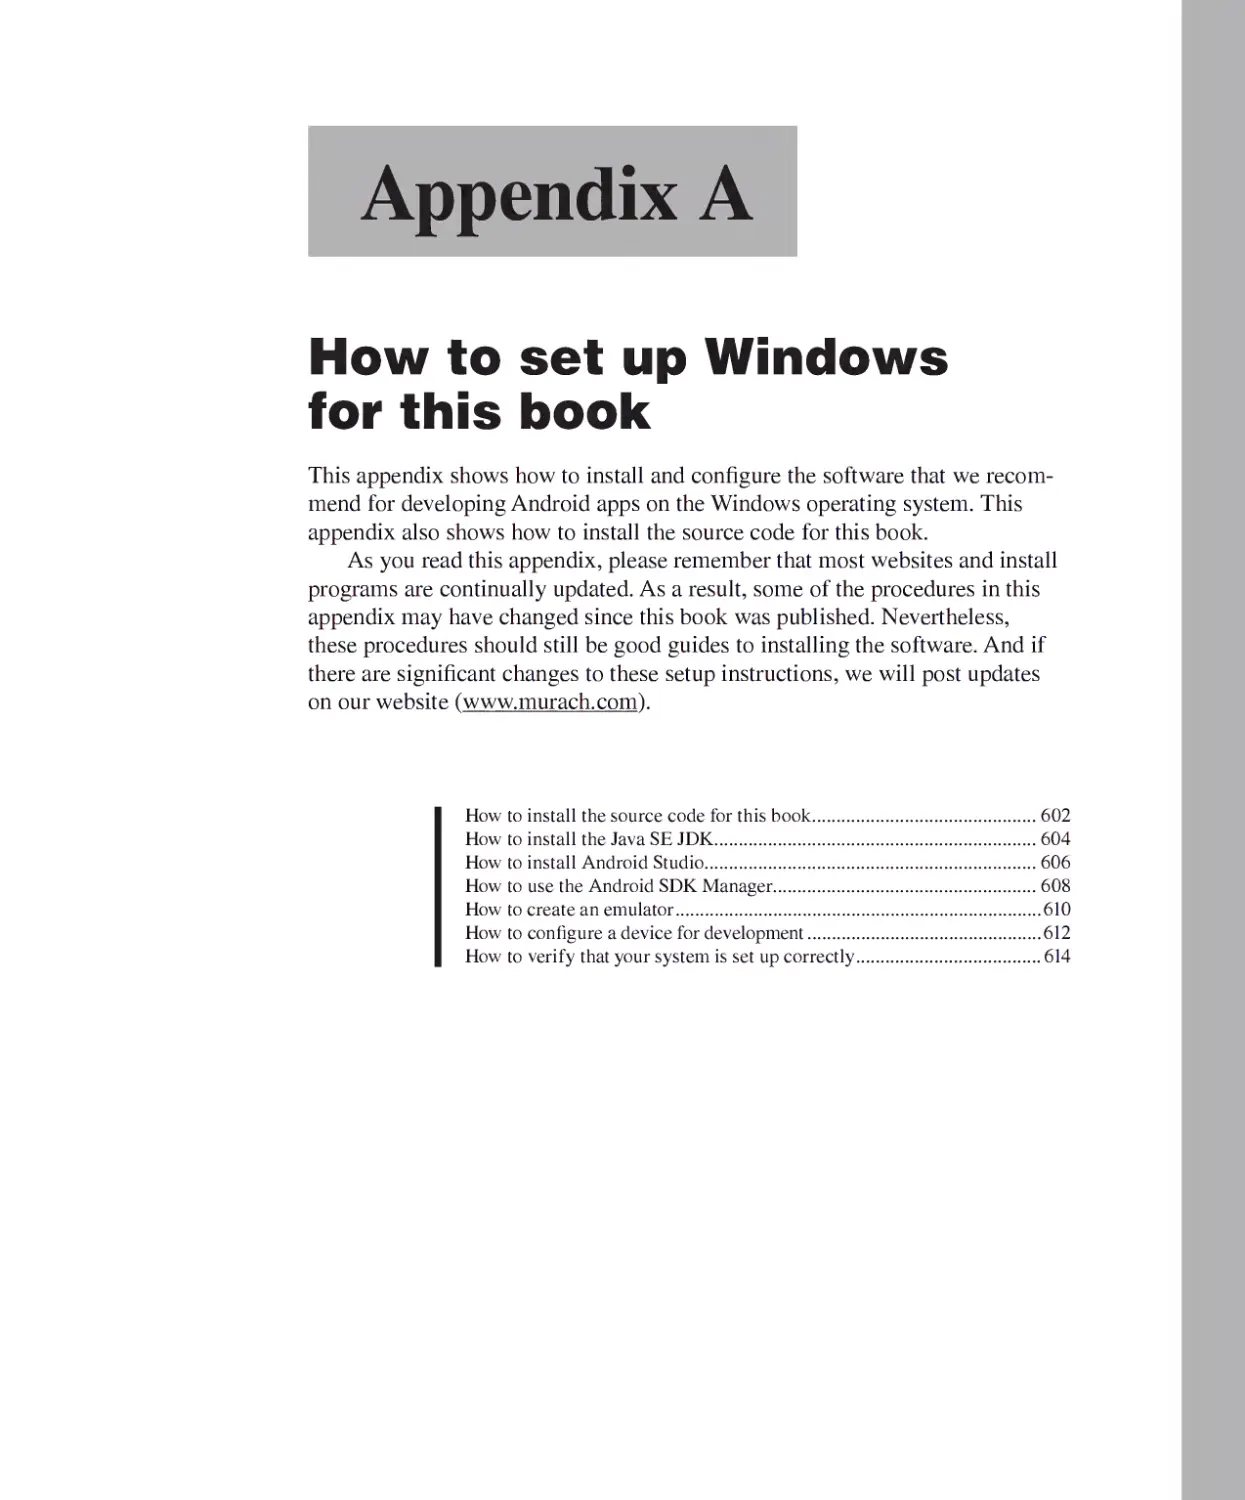 Appendix A - How to Set Up Windows for This Book